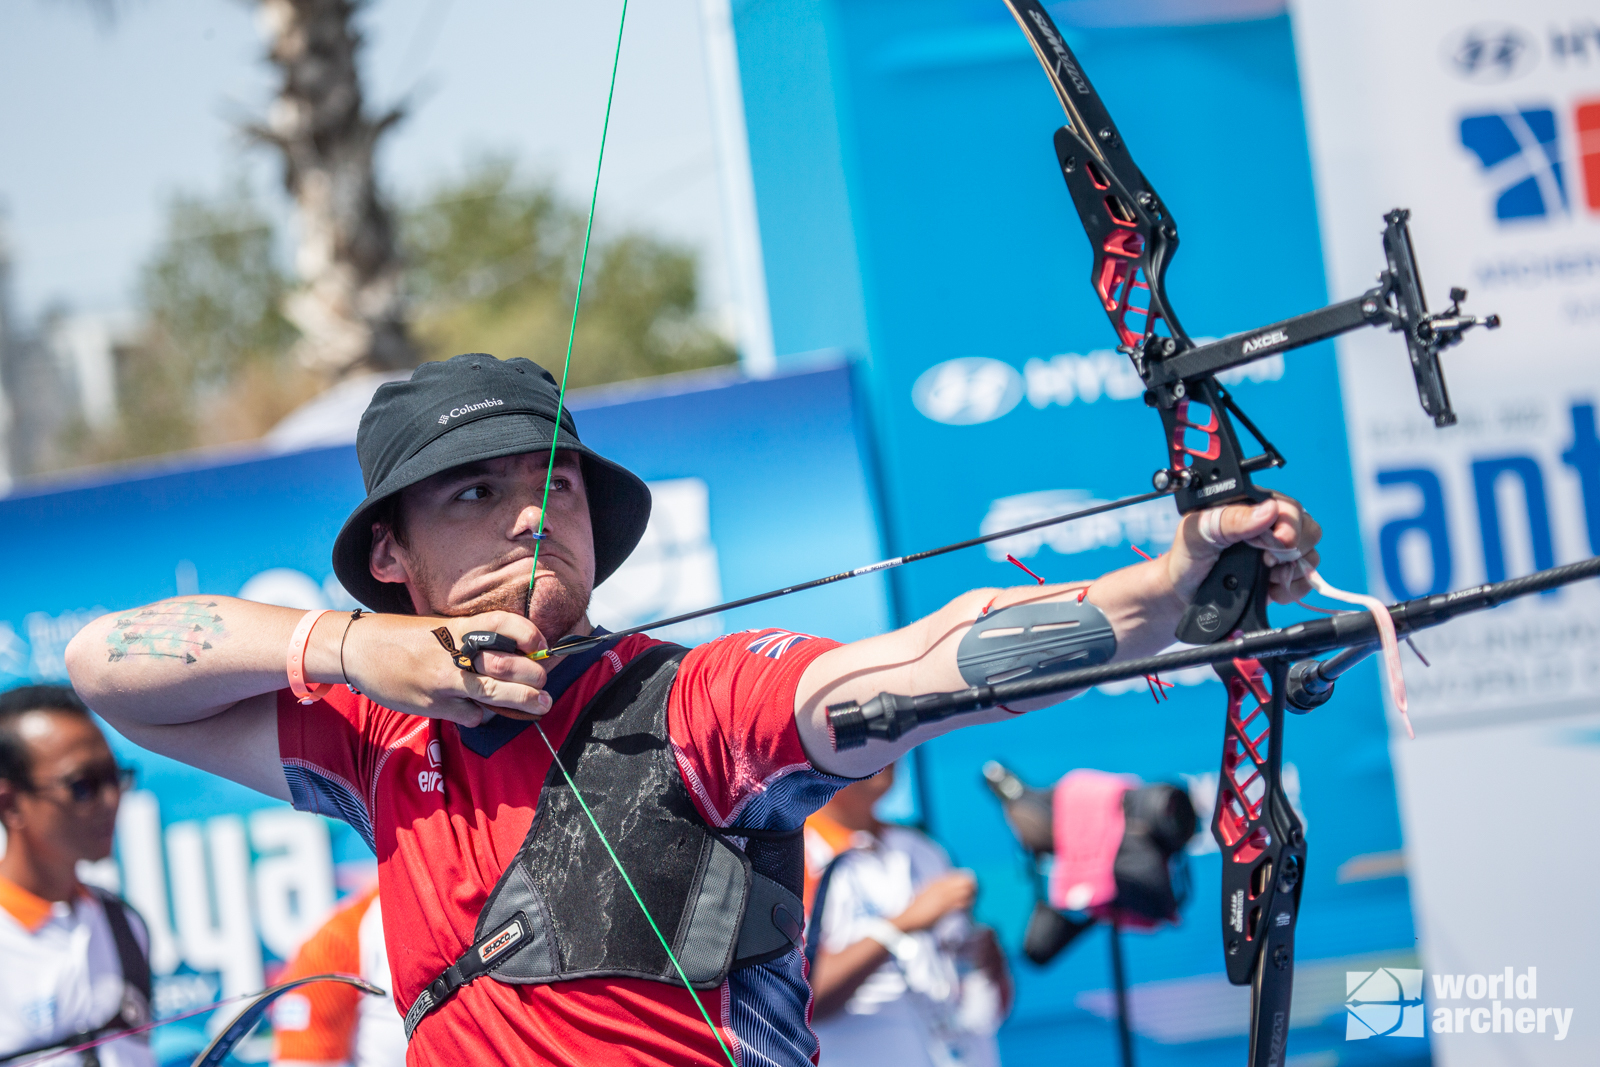 Alex Wise winning silver as part of GB's recurve mixed team in Antalya